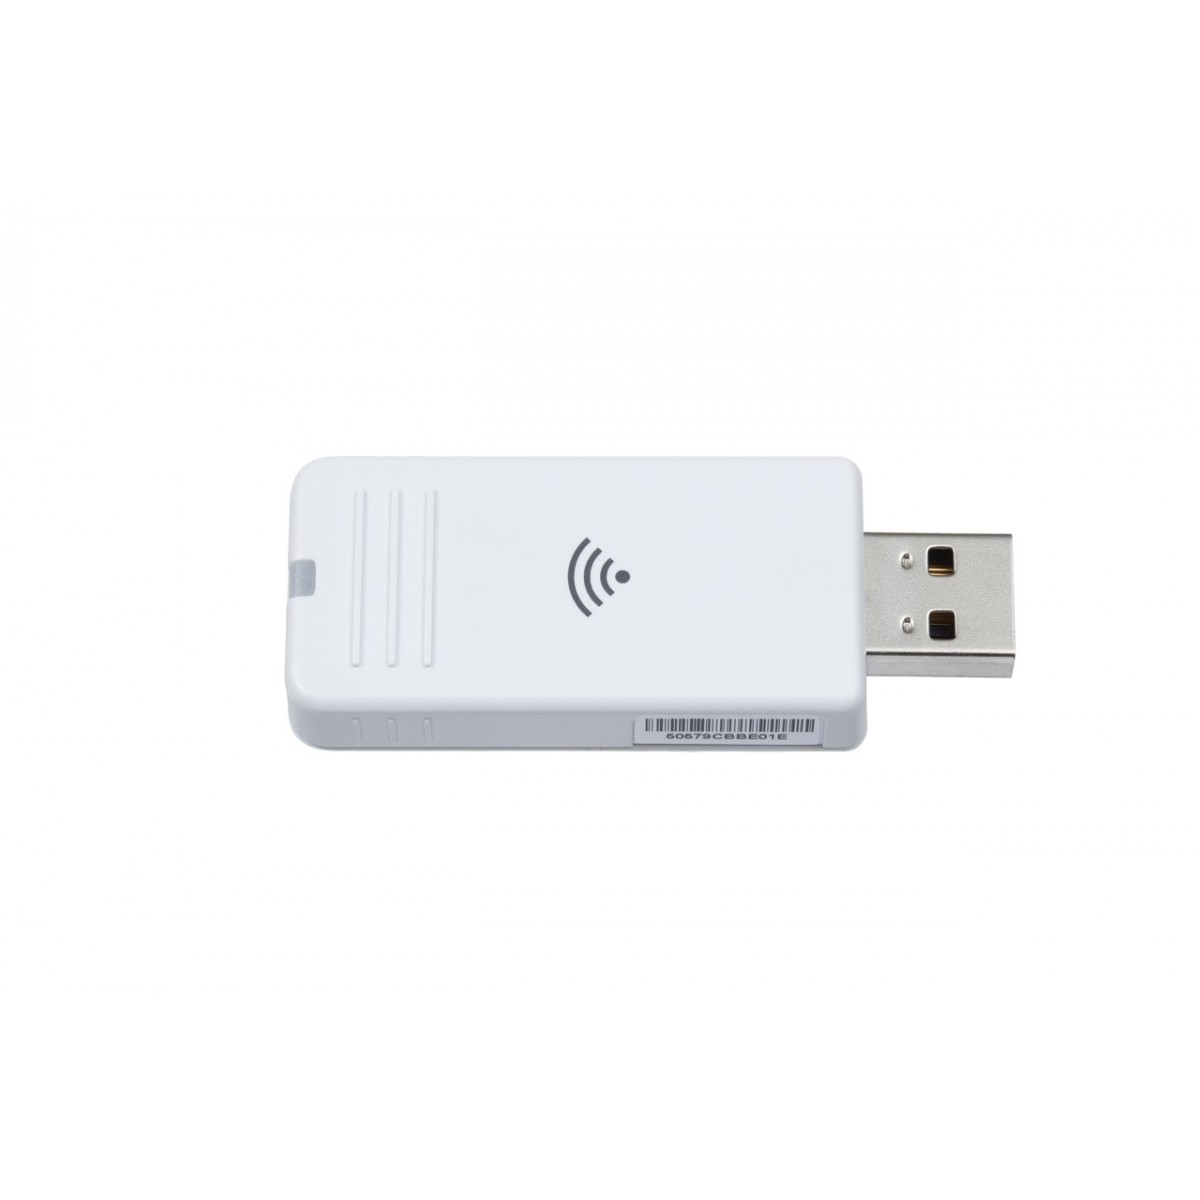 Epson DUAL FUNCTION WIRELESS ADAPTER - USB Wi-Fi adapter - Epson - White - 5 GHz - 50 mm - 200 mm